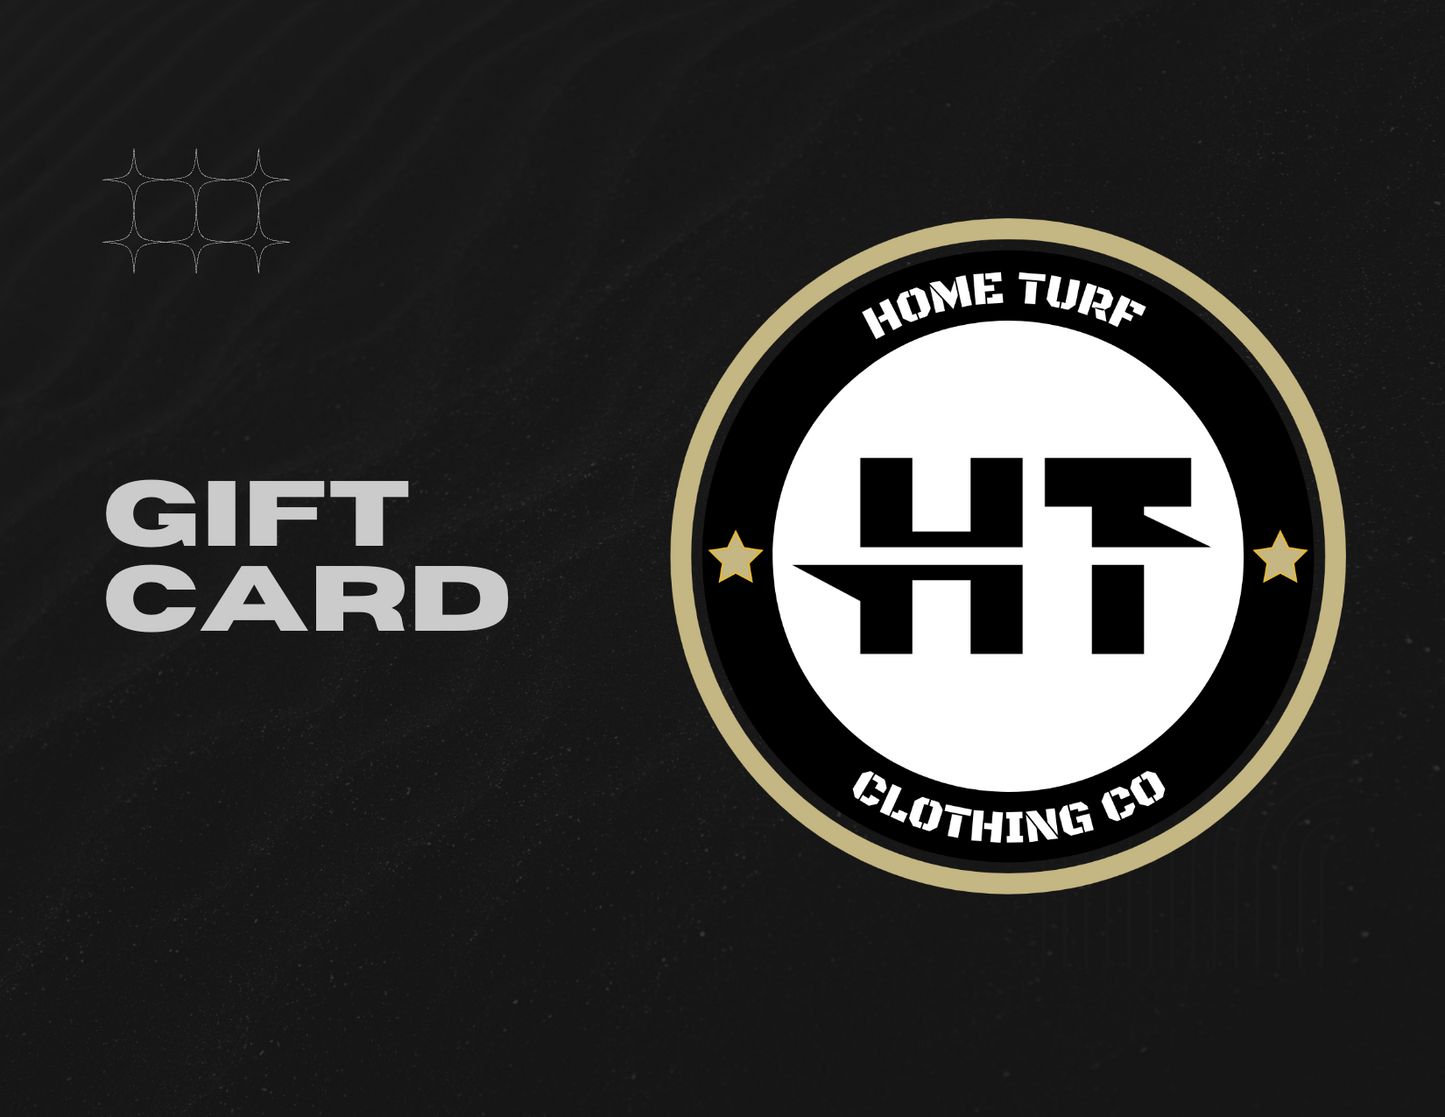 Home Turf Clothing Co. Gift Card